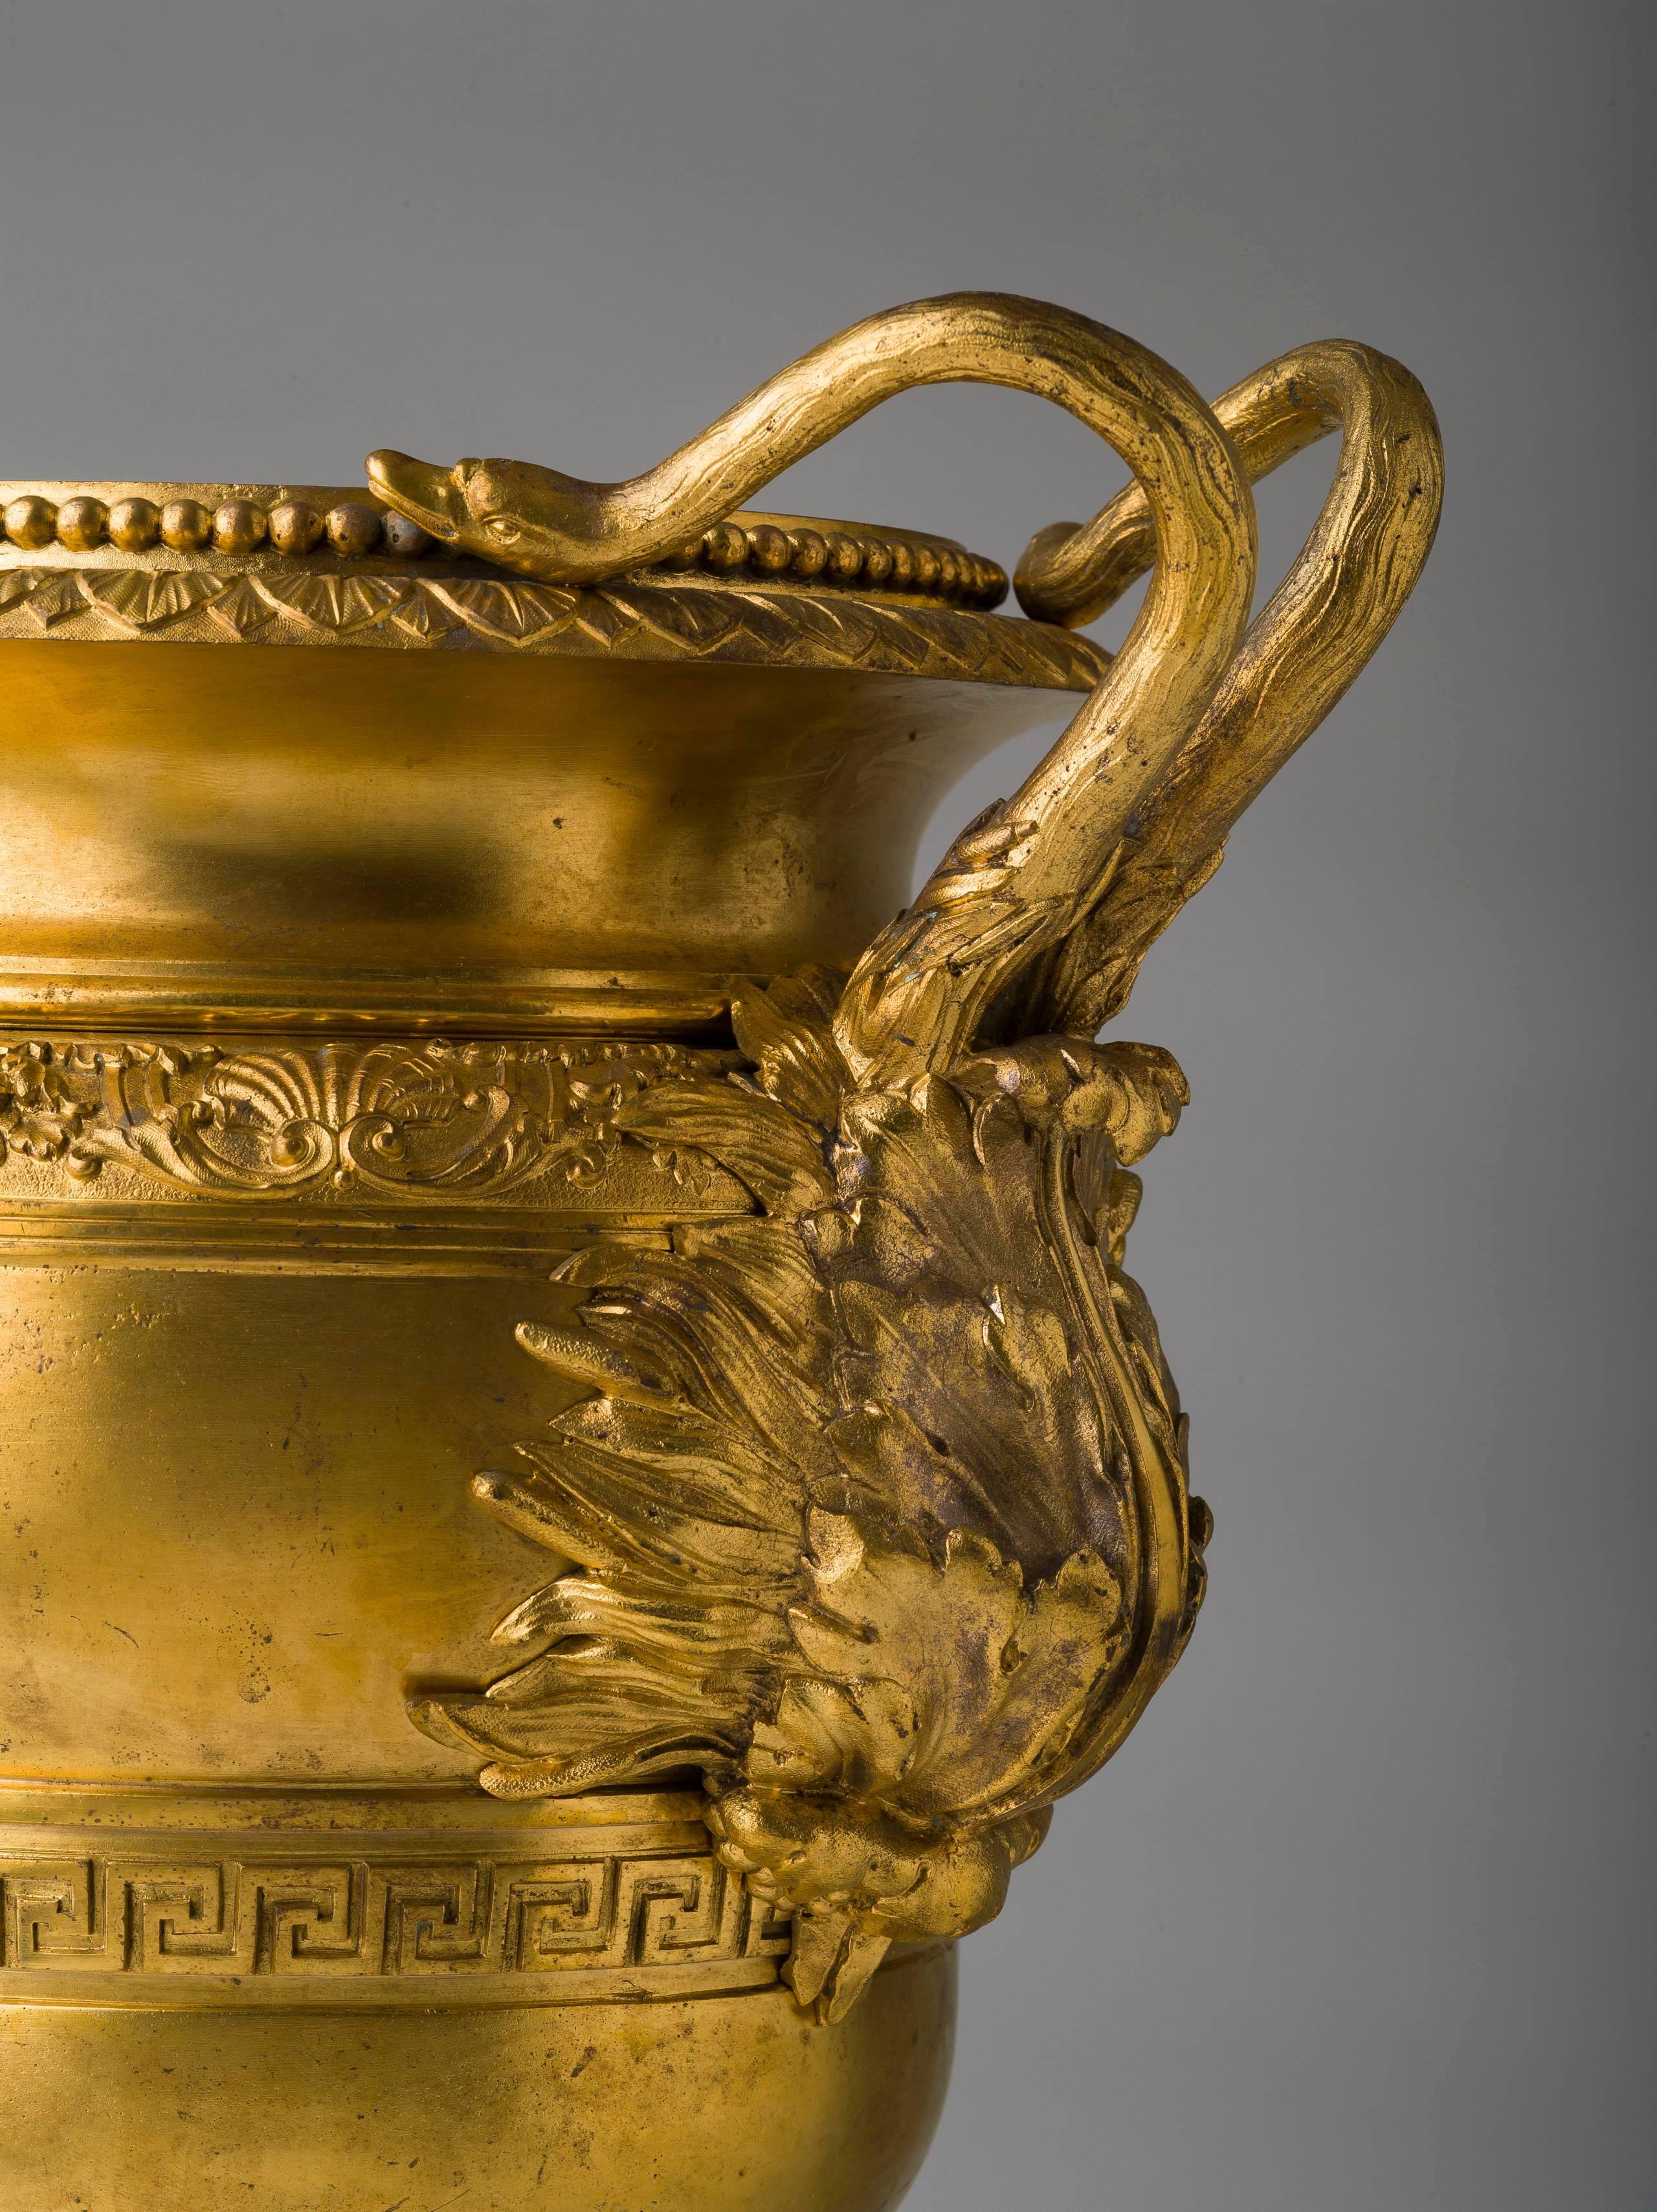 Of circular urn form with two double swan handles ending in acanthus, the body with two horizontal bands of shell and foliate and Greek key decoration, raised on a circular fluted foot ending in a square plinth. 

Following Matthew Boulton and